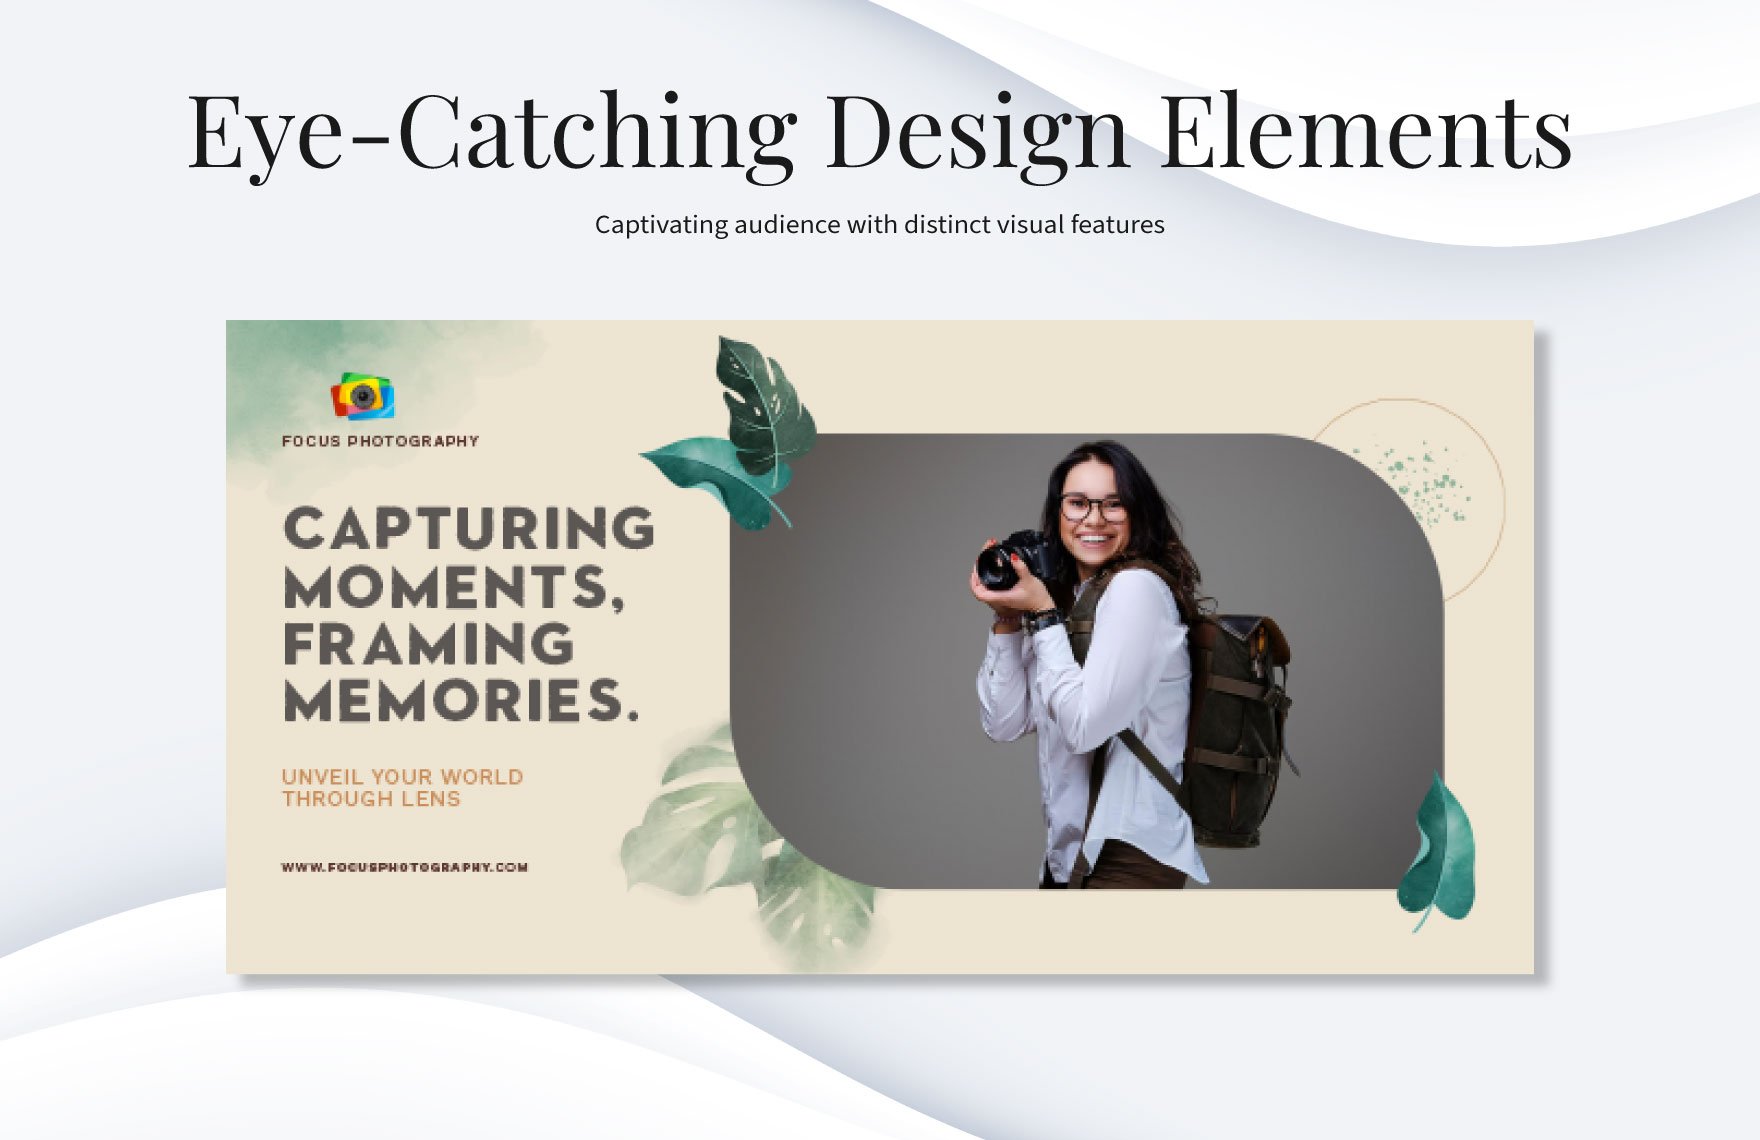 Photography Banner Template